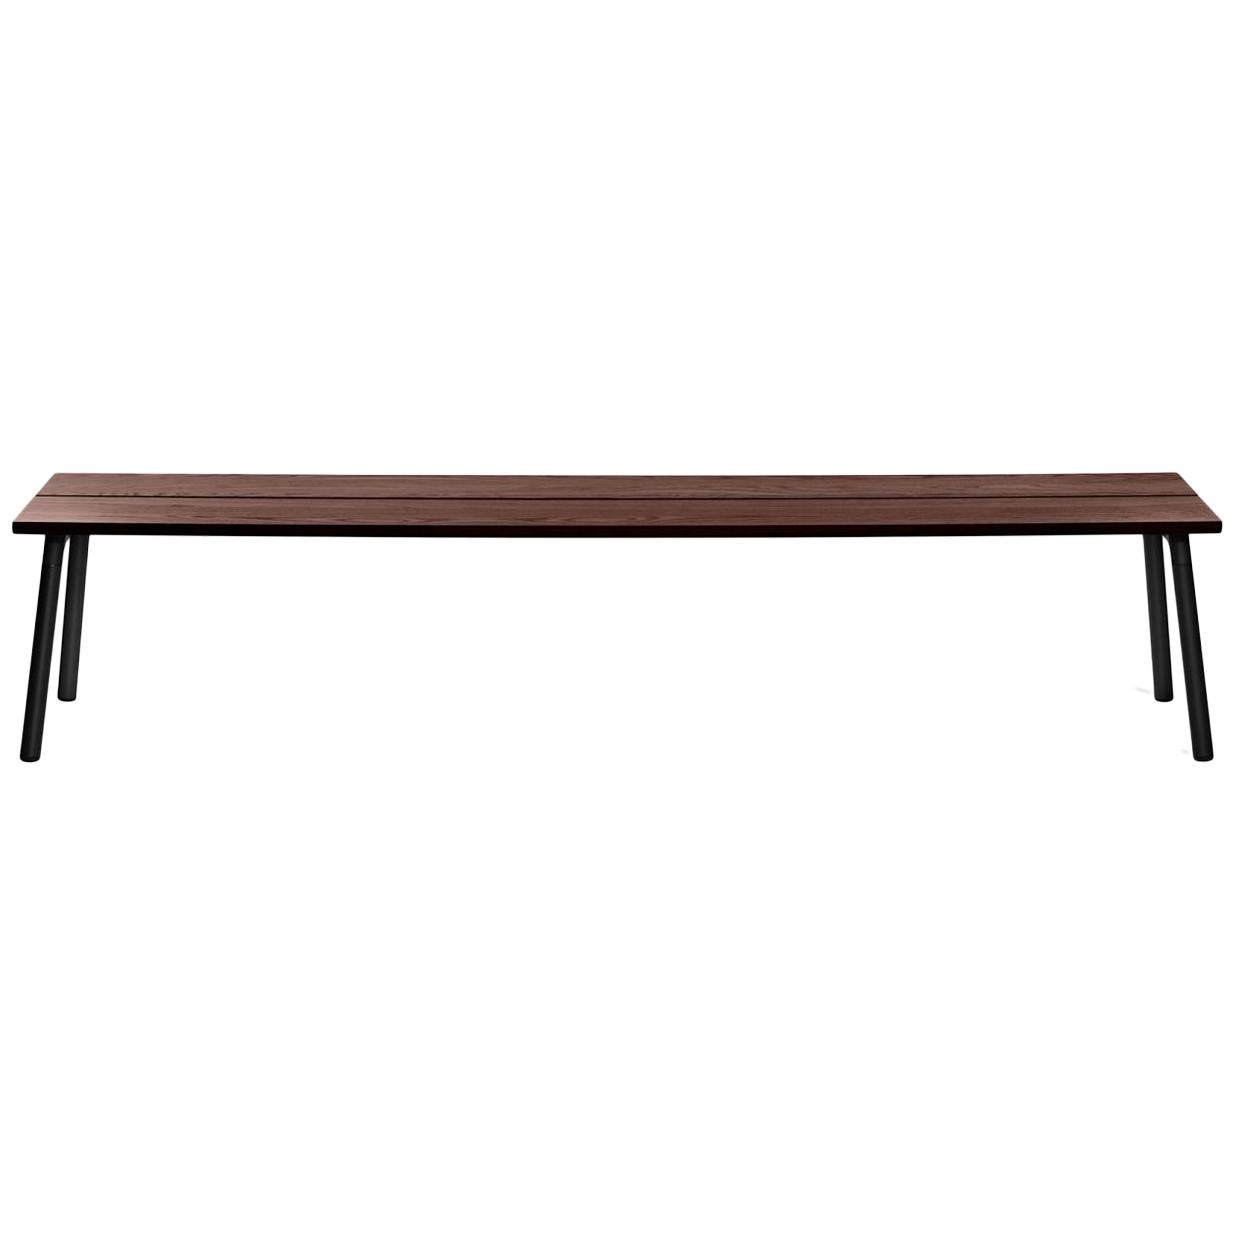 Emeco Run 4-Seat Bench in Black Powder-Coat and Walnut by Sam Hecht & Kim Colin